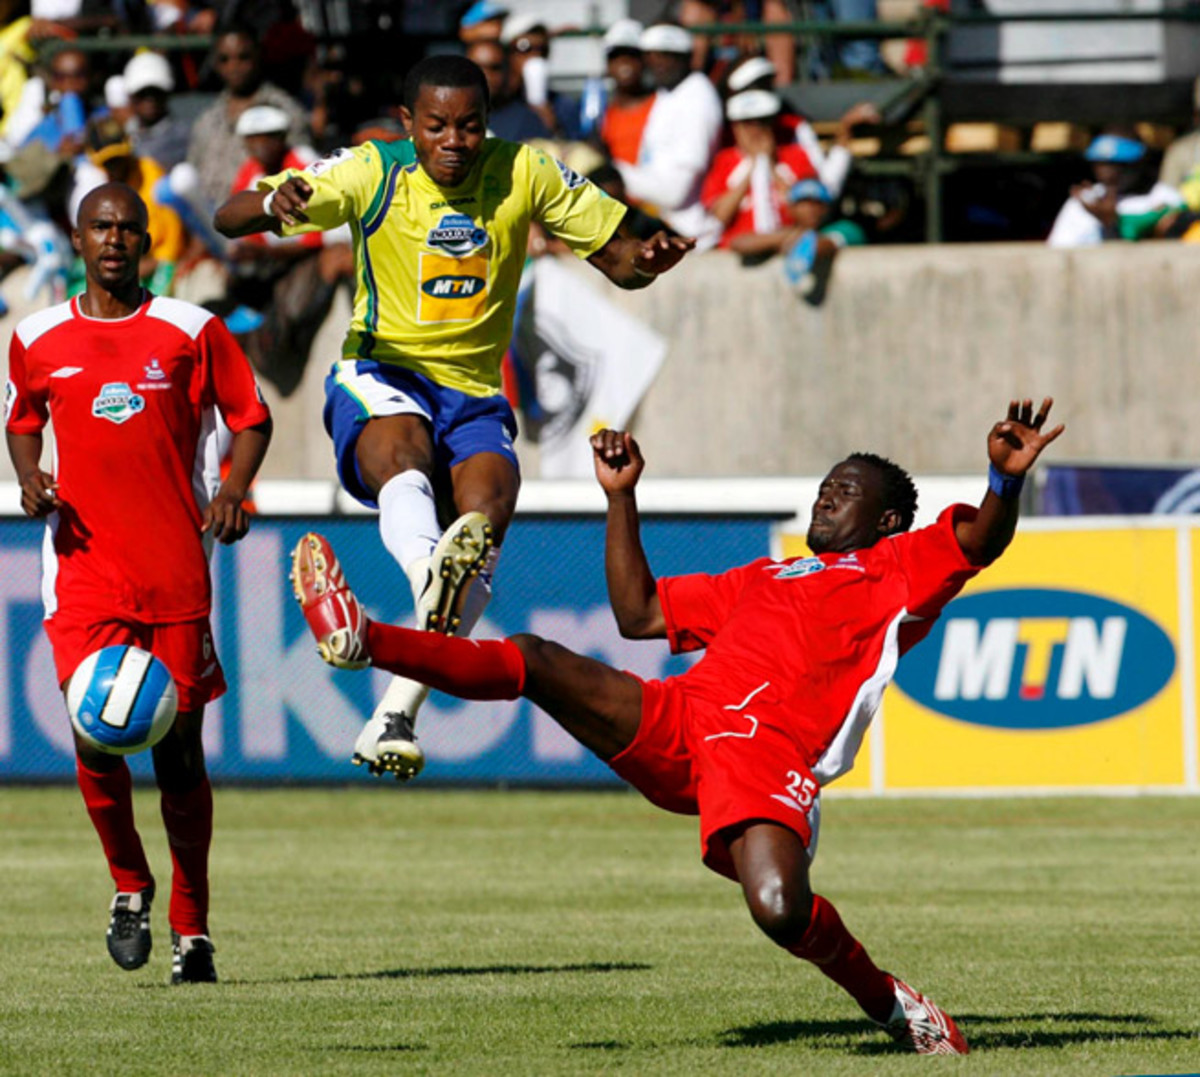 Patrick Apataki goes airborne for the Mamelodi Sundowns in 2007, donning the yellow and blue uniforms introduced by owner Zola Mahobe, who dubbed his team "The Brazilians."